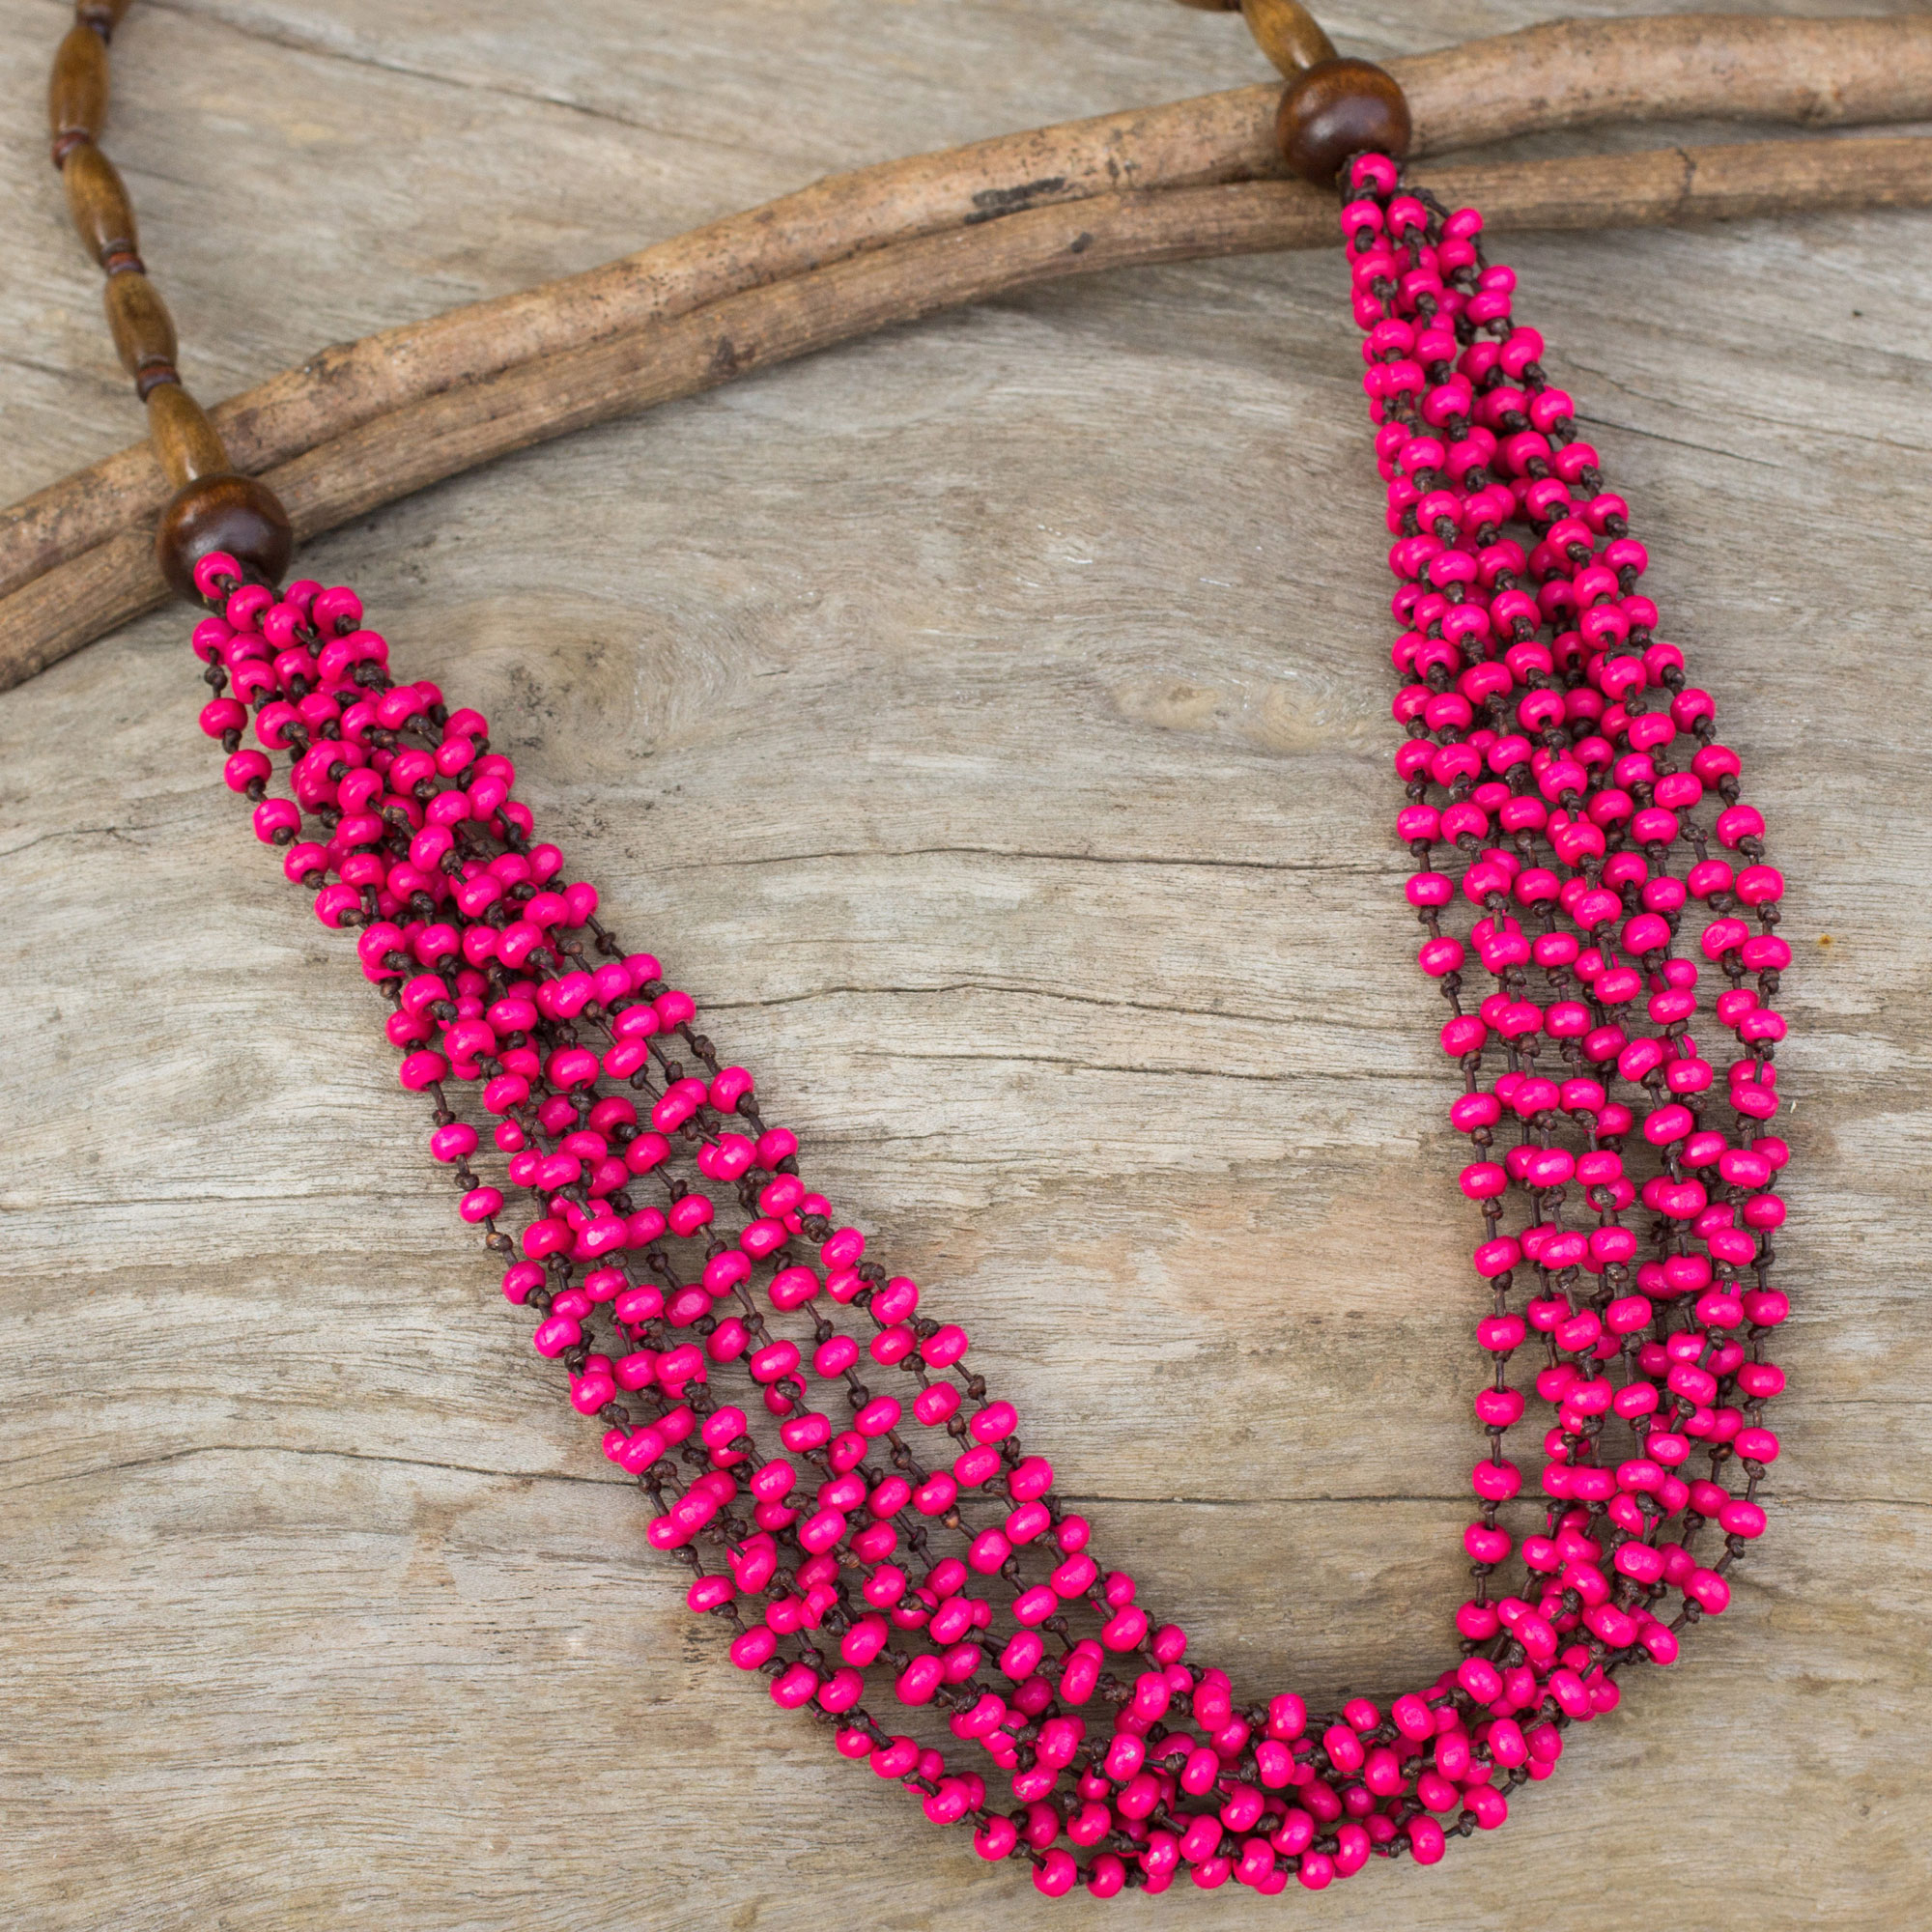 Fuscia Pink Wooden Bead Necklace